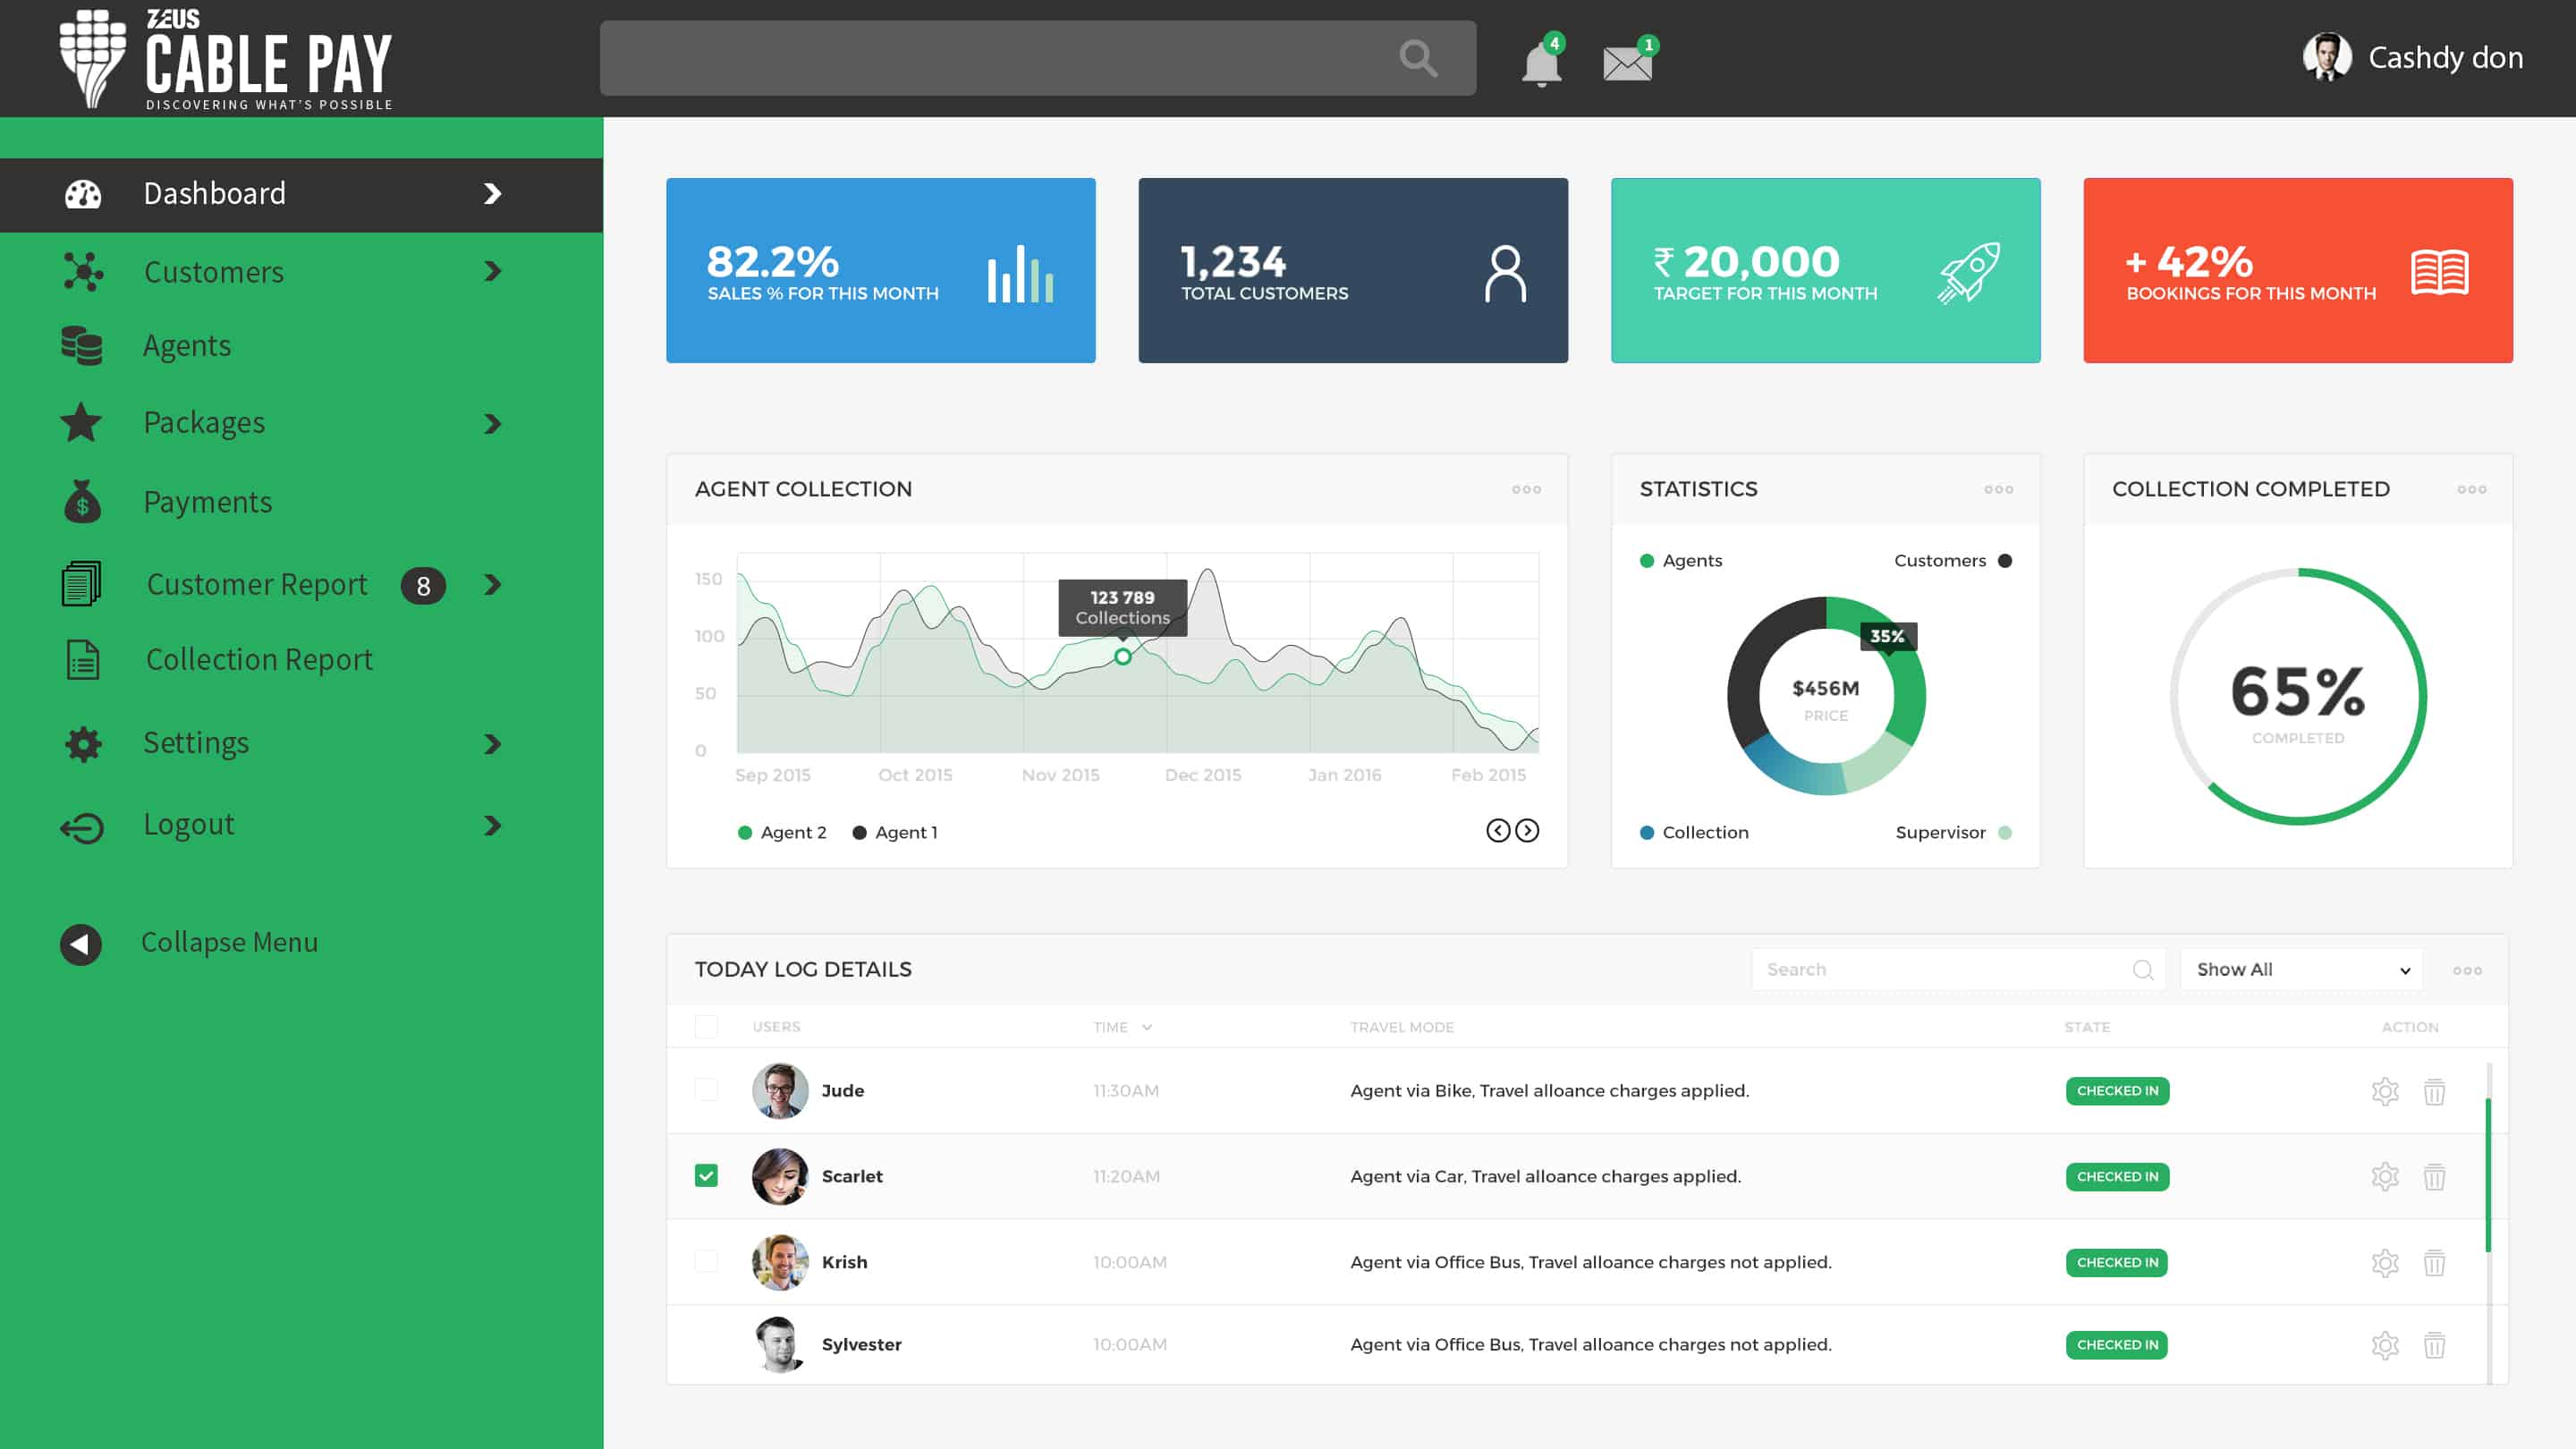 Zeus Cable Pay – Dashboard